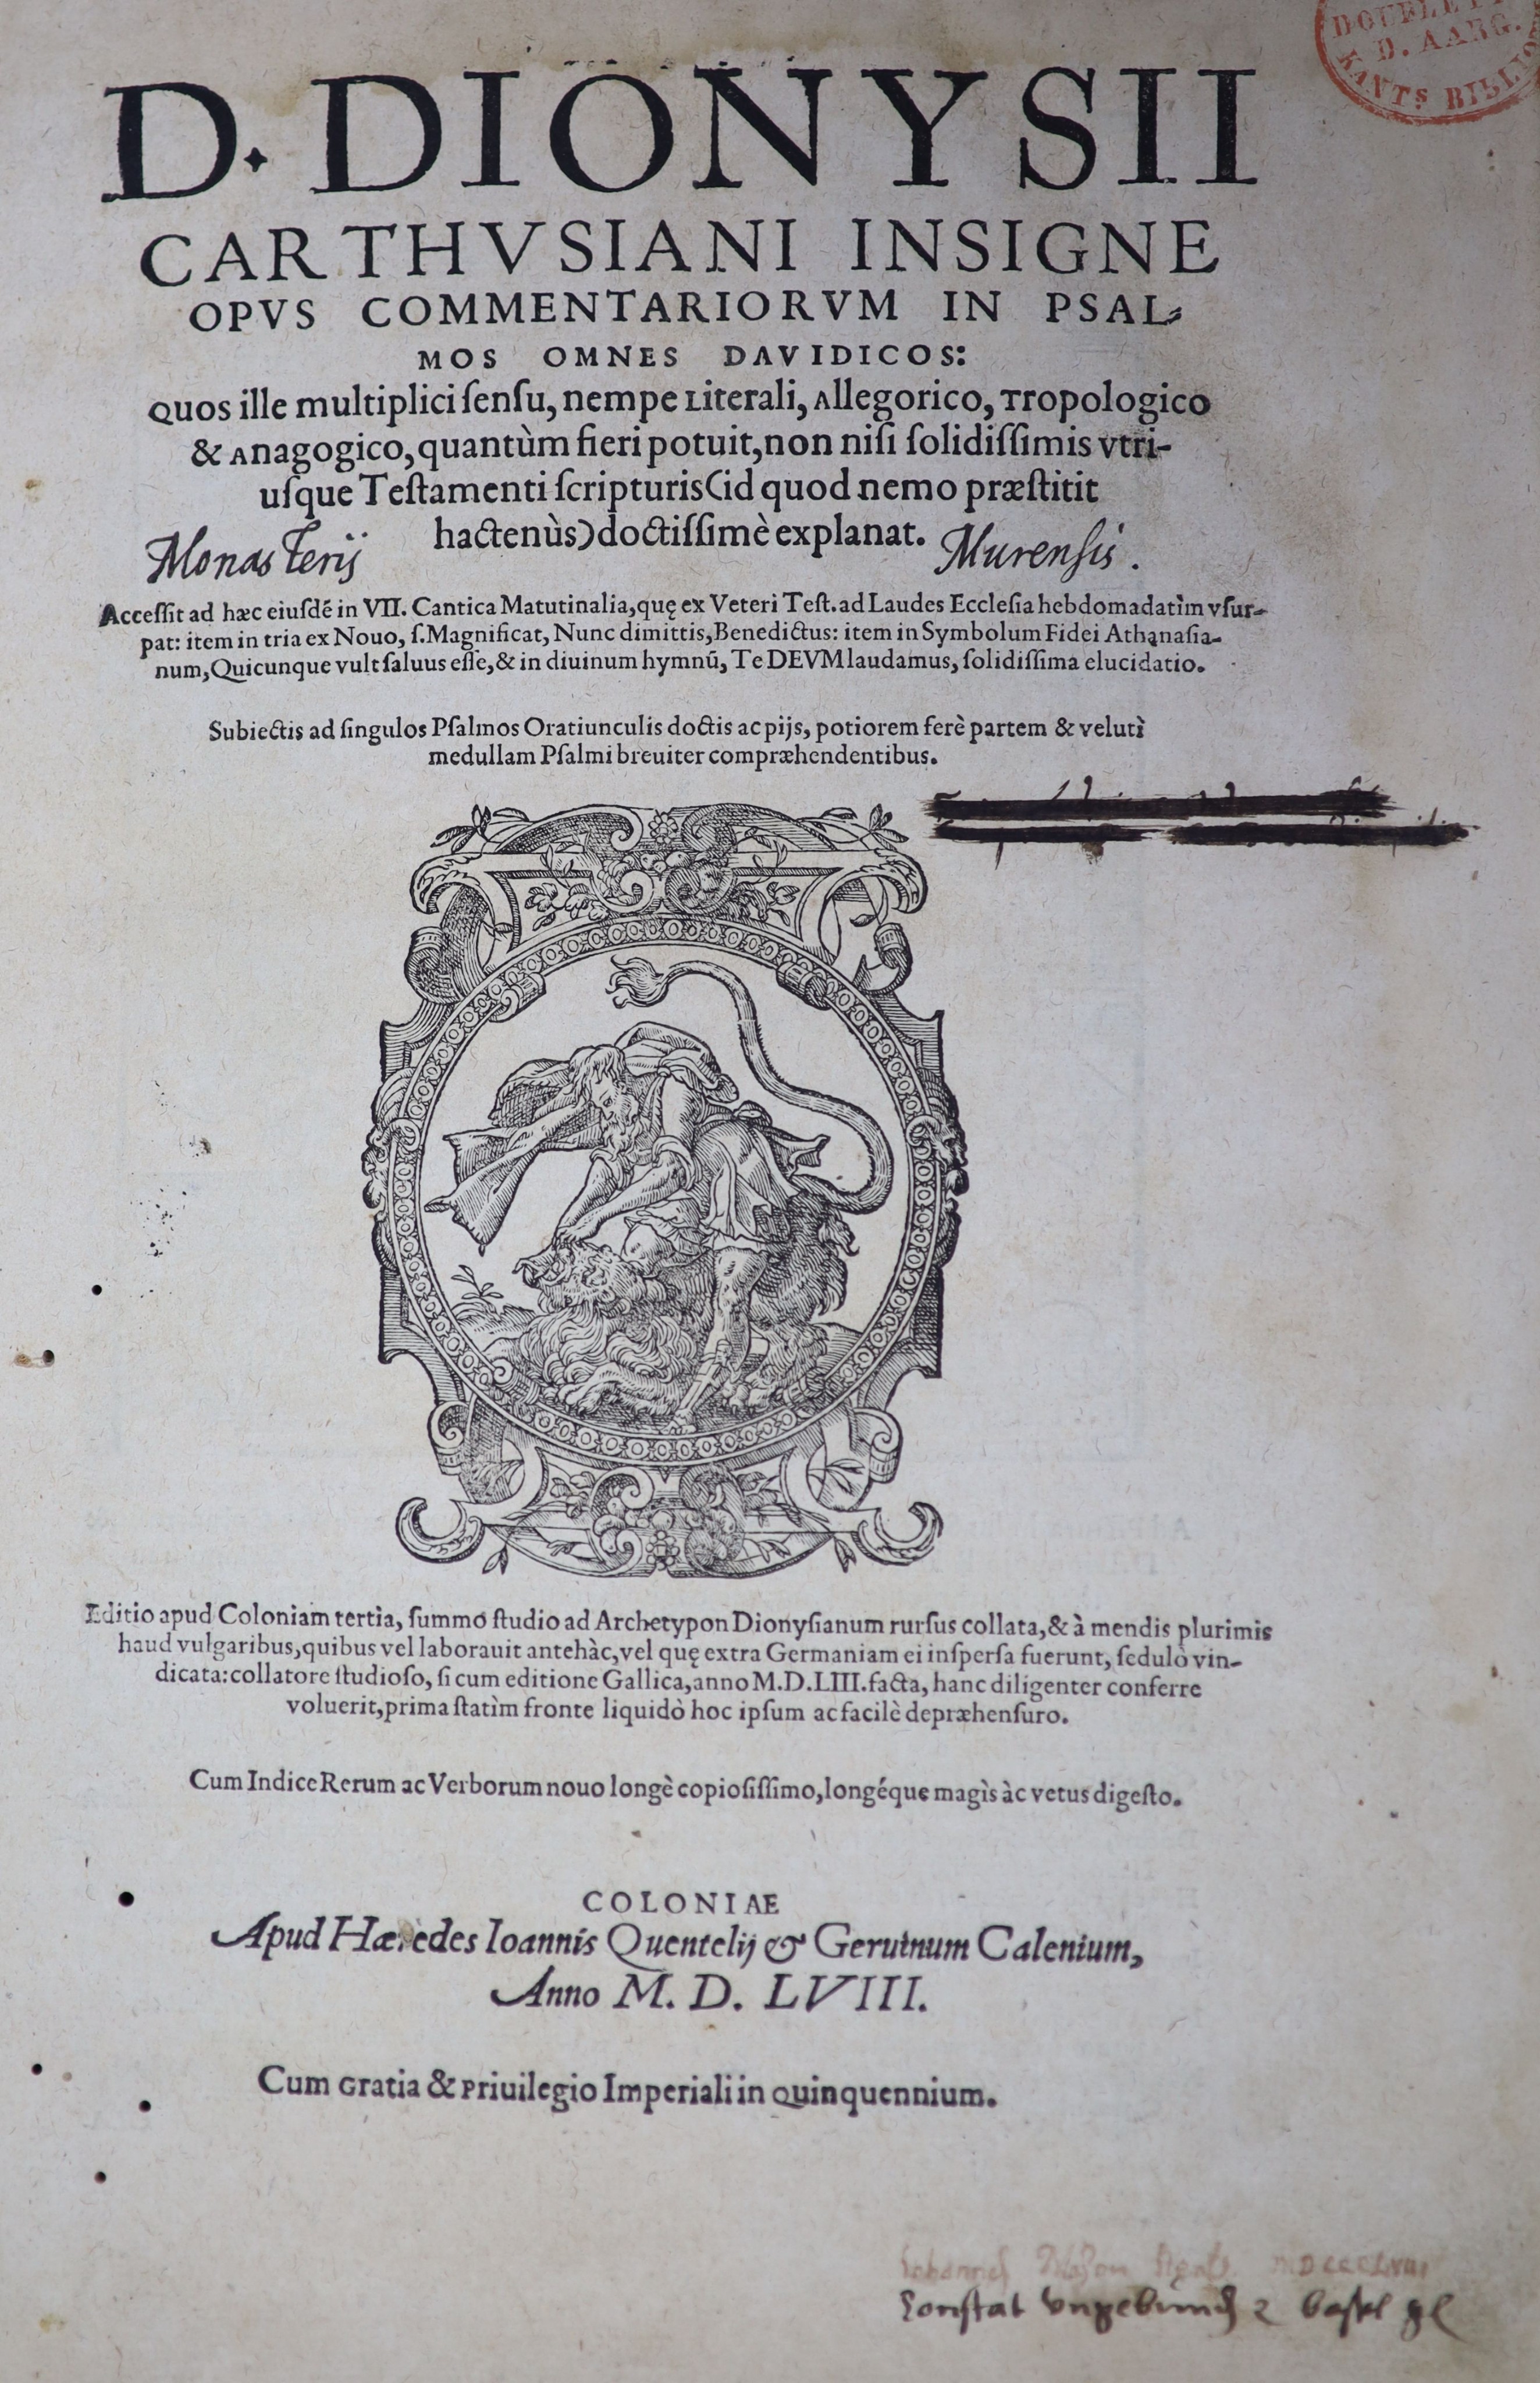 Carthusianus, Dionysius - D.Dionyii Carthusiani Insigne Opus Commentariorrum In Psalmos Omnes Davidicos, folio, contemporary embossed vellum with brass clasps, cover detached, lacking portrait frontispiece, boards with s